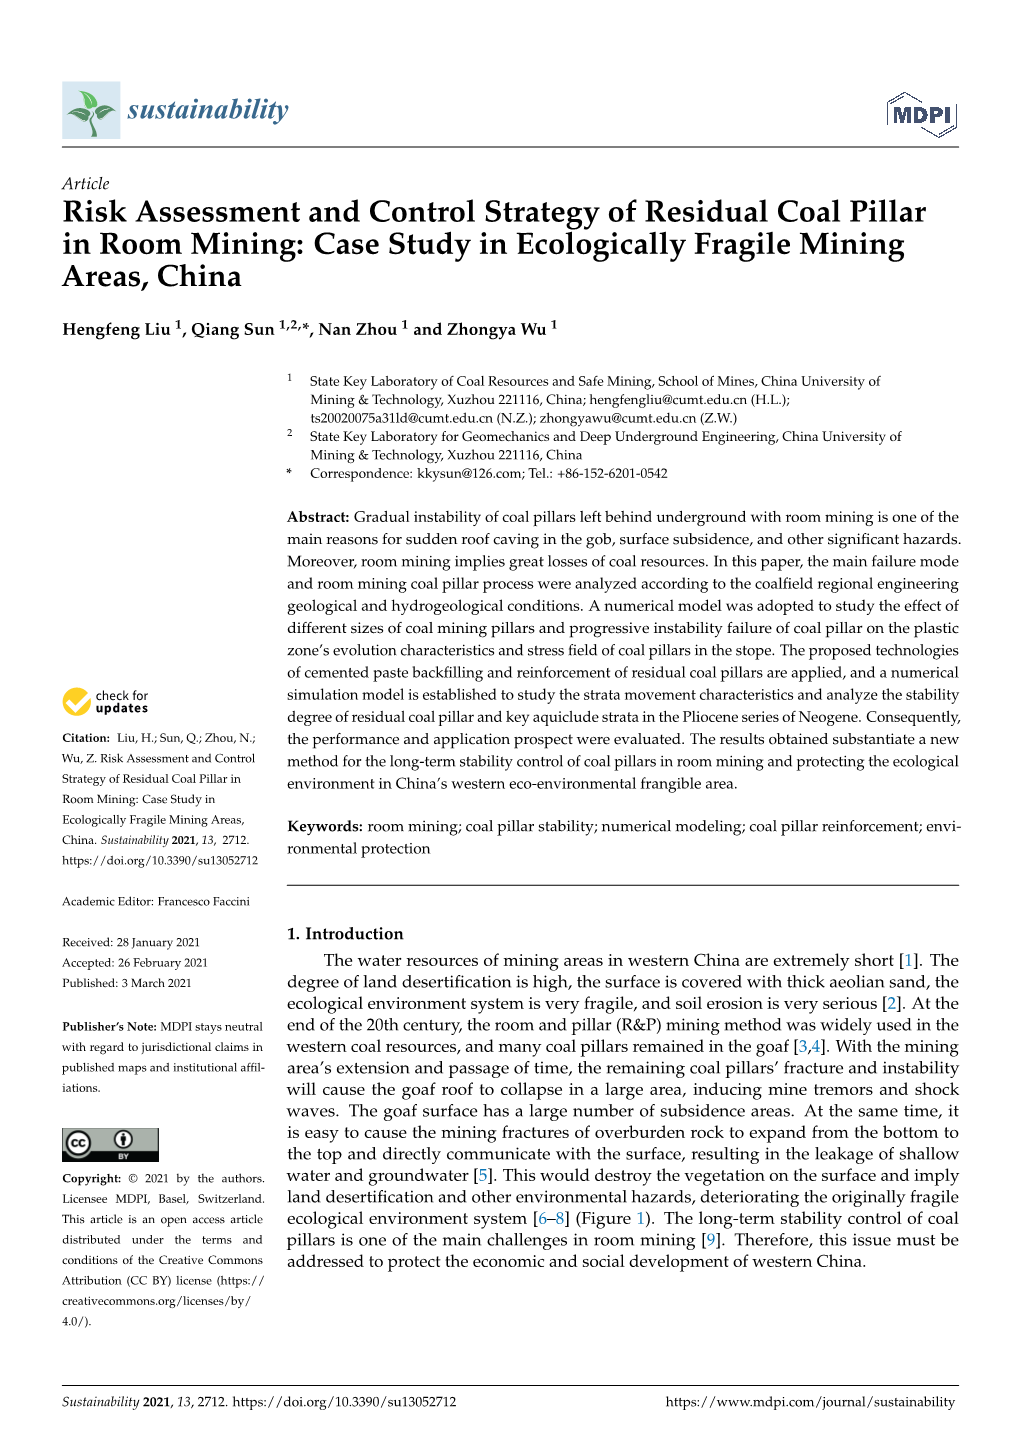 Risk Assessment and Control Strategy of Residual Coal Pillar in Room Mining: Case Study in Ecologically Fragile Mining Areas, China